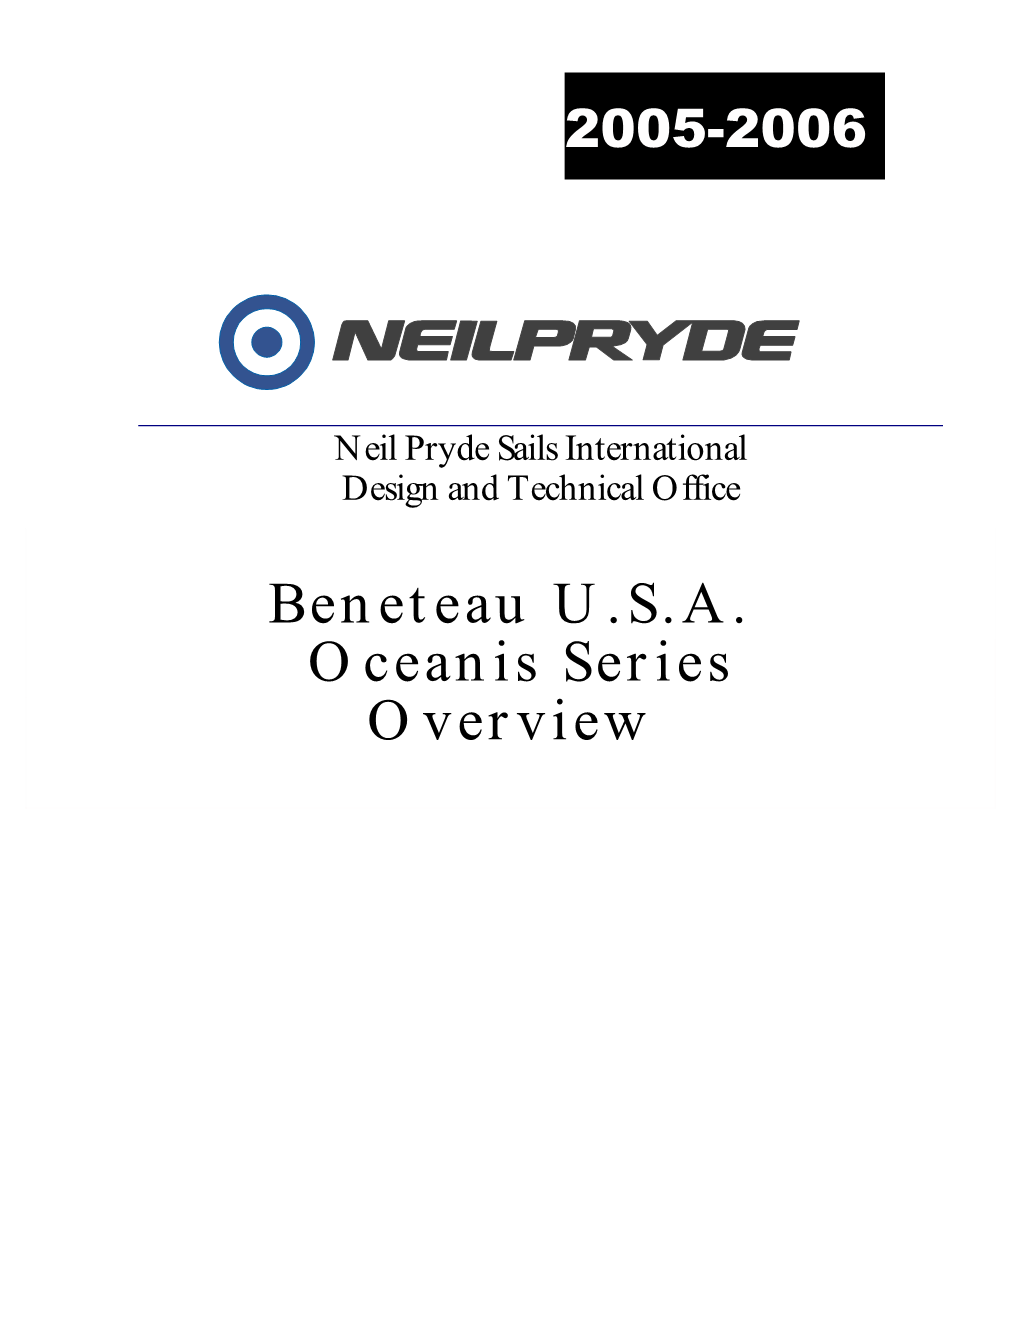 Beneteau U.S.A. Oceanis Series Overview INTERNATIONAL DESIGN and TECHNICAL OFFICE Product Overview for Beneteau Dealers